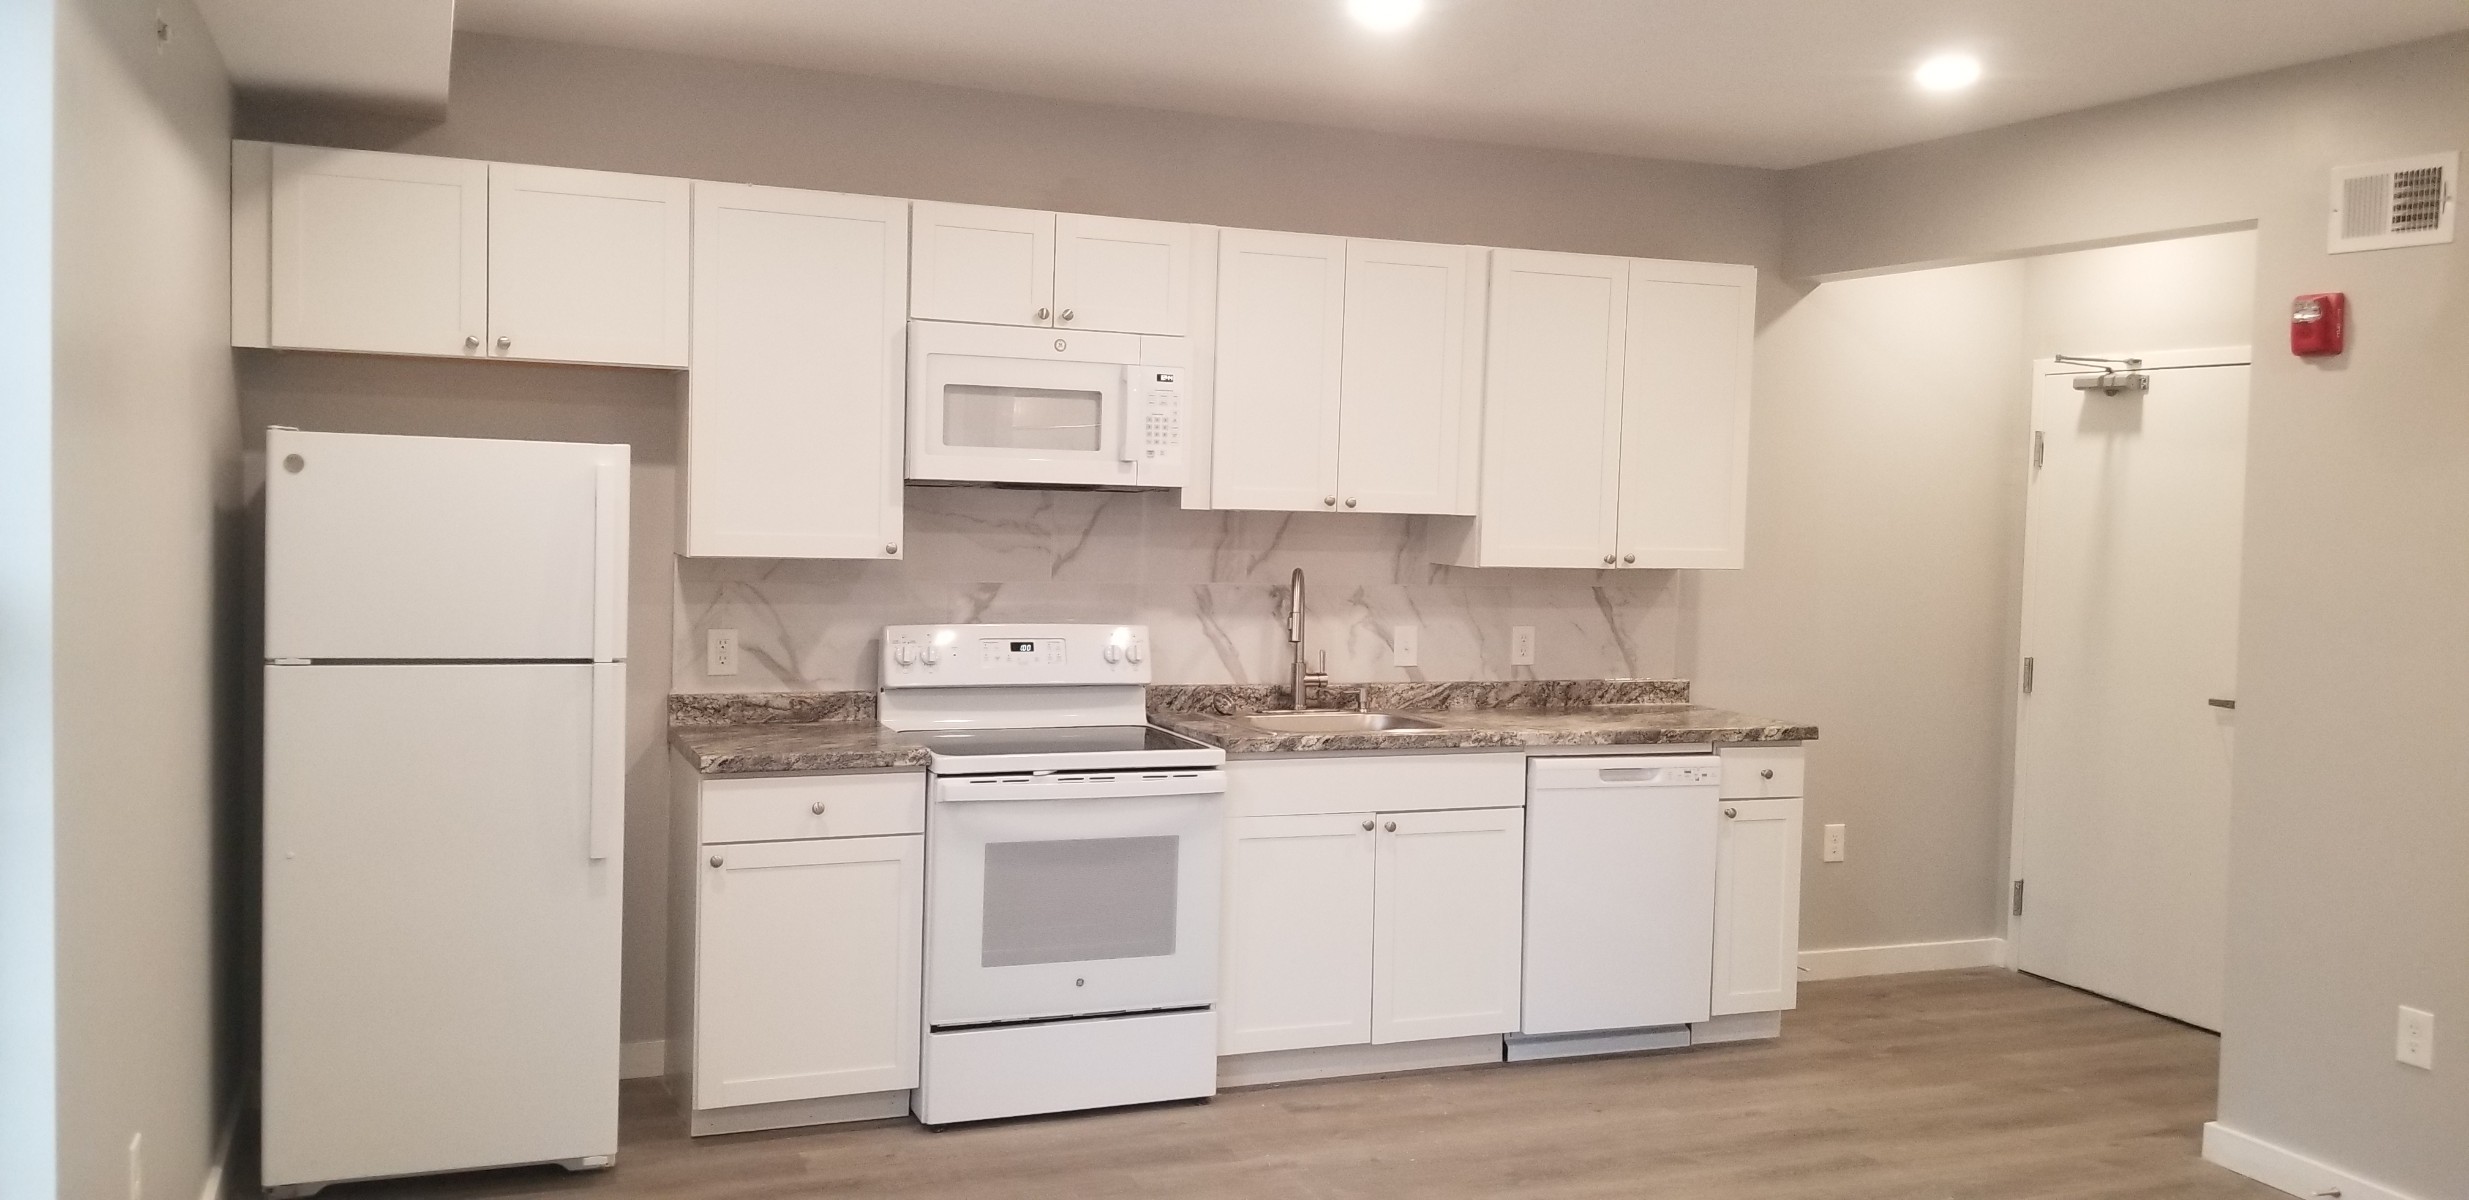 side view of whole kitchen with white appliances